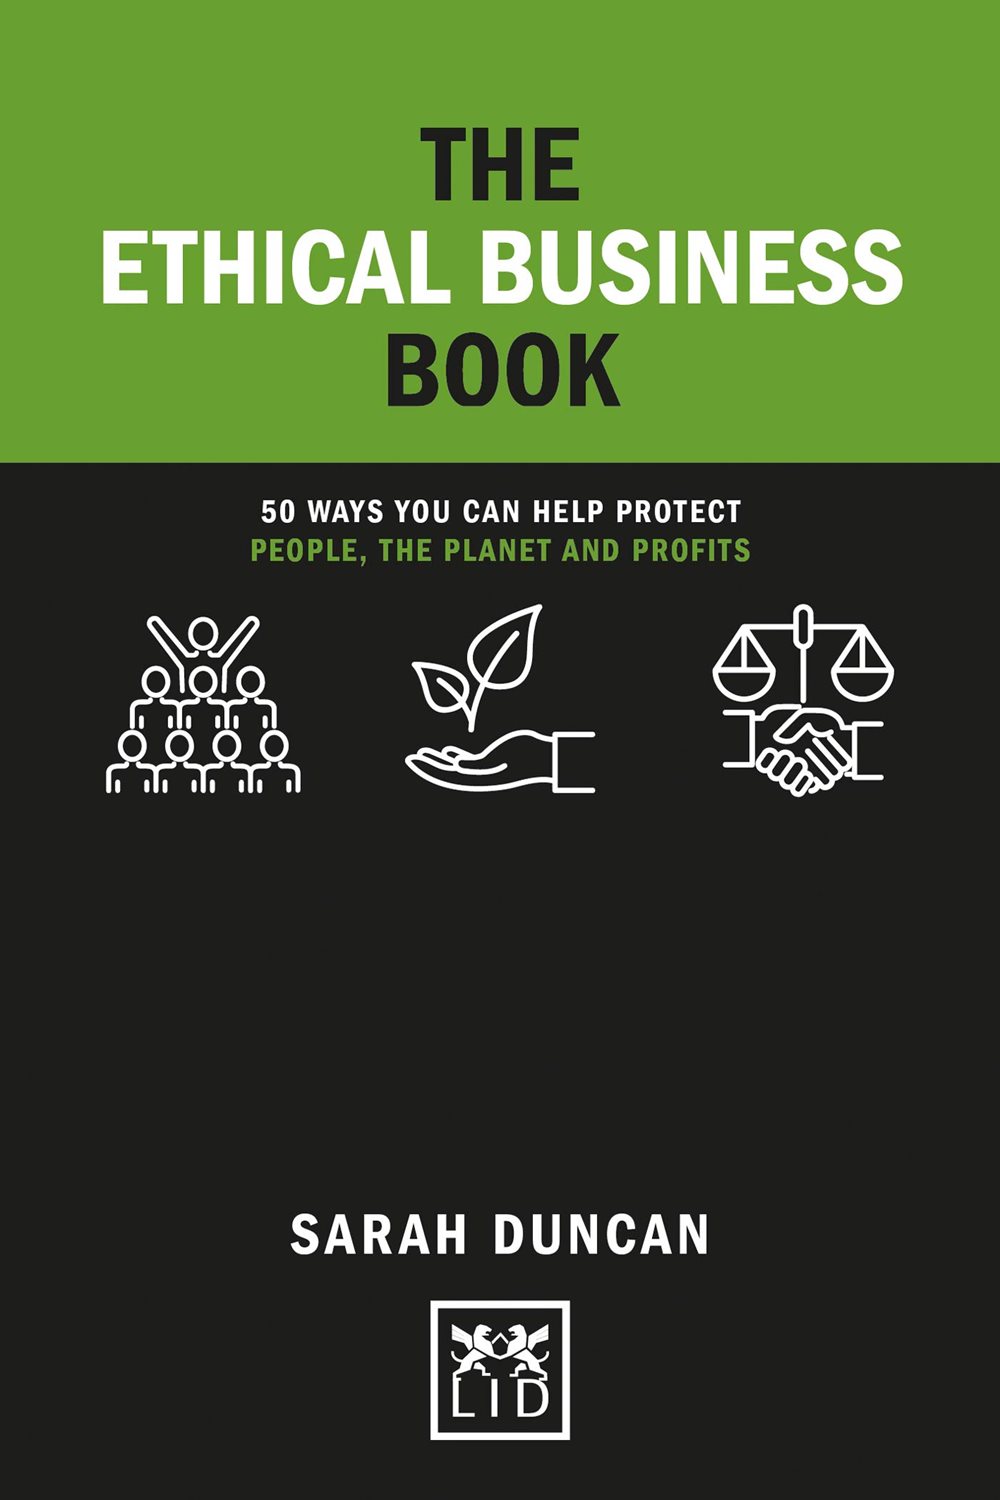 Ab0603 Business Gone Green Ethical Reasoning Assignment